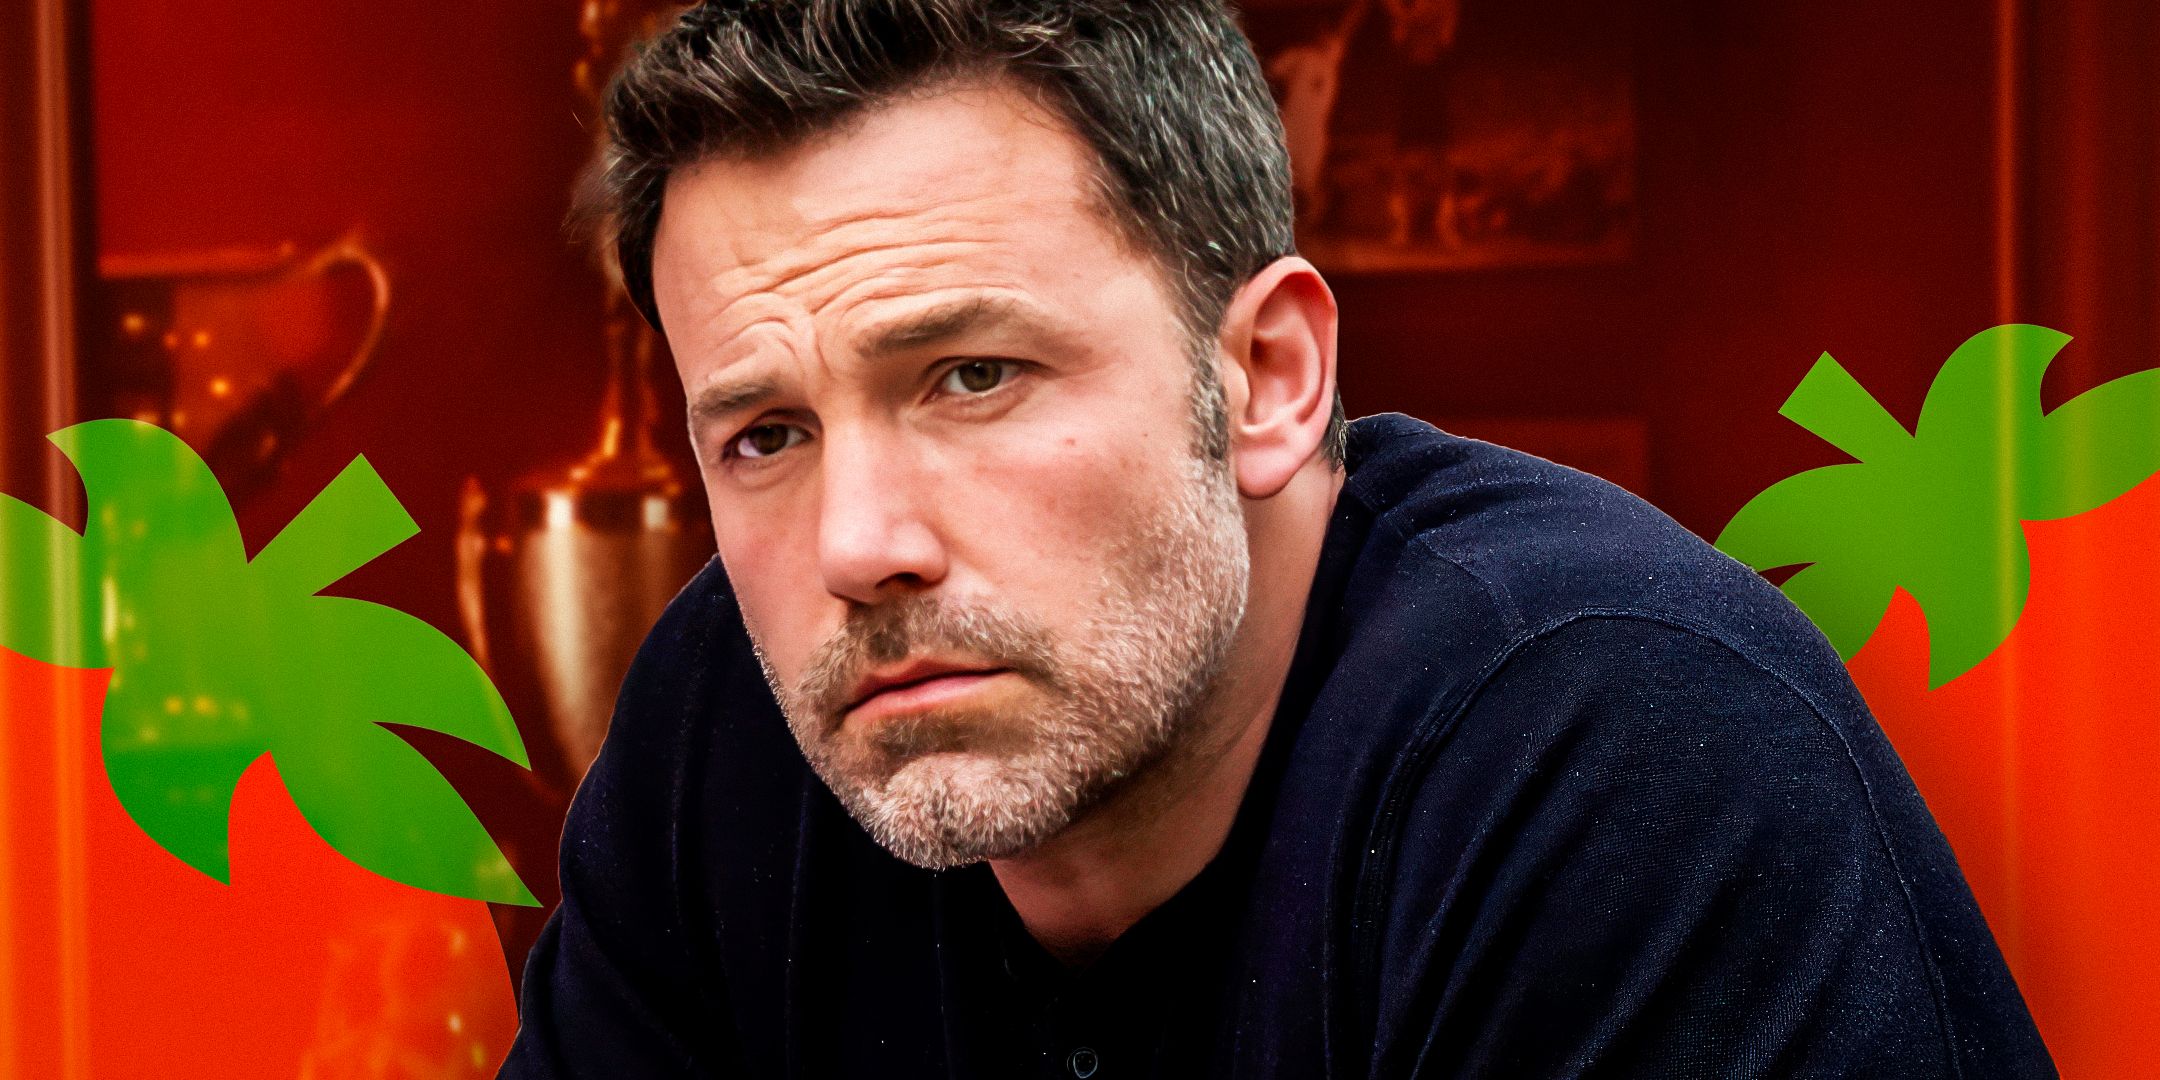 Ben Affleck Movie’s New Streaming Success Is A Reminder To Watch This 4-Year-Old Drama With 93% On Rotten Tomatoes